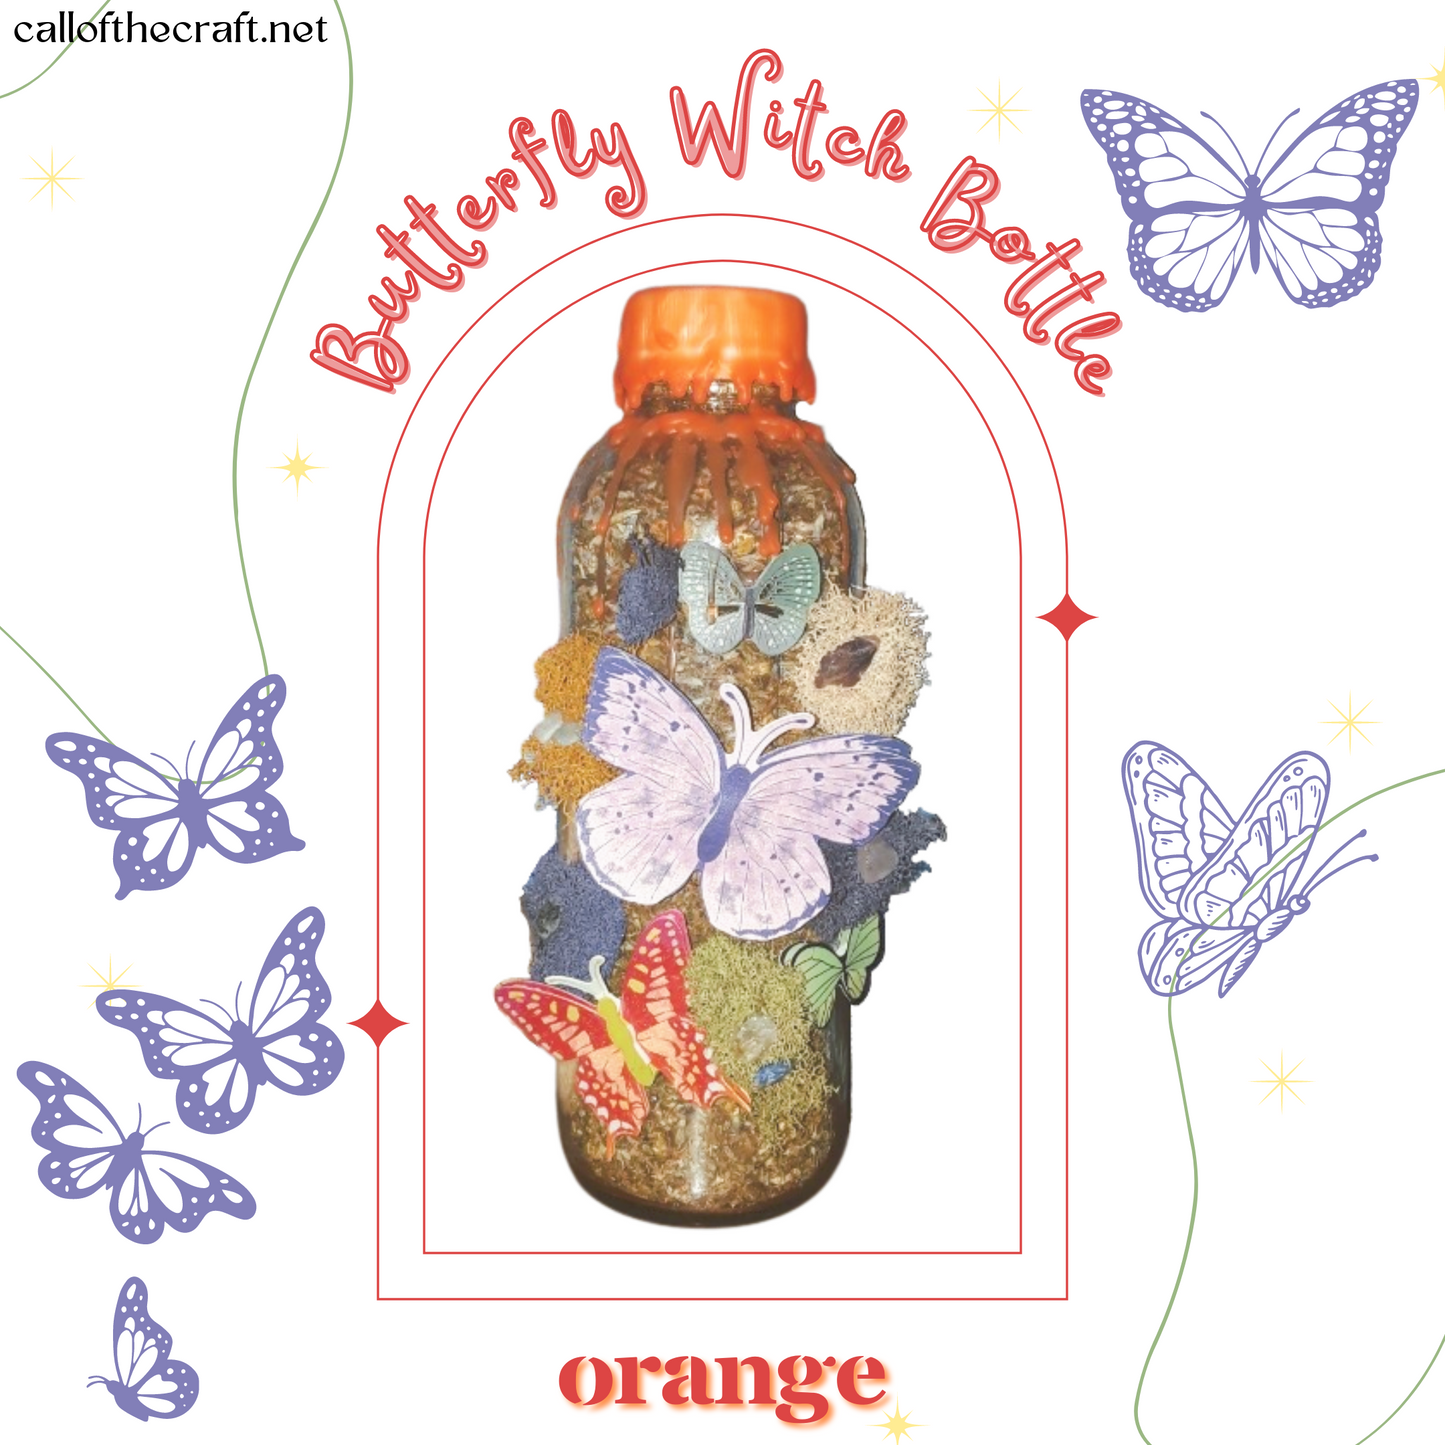 Butterfly Witch Bottles, Orange - The Call of the Craft